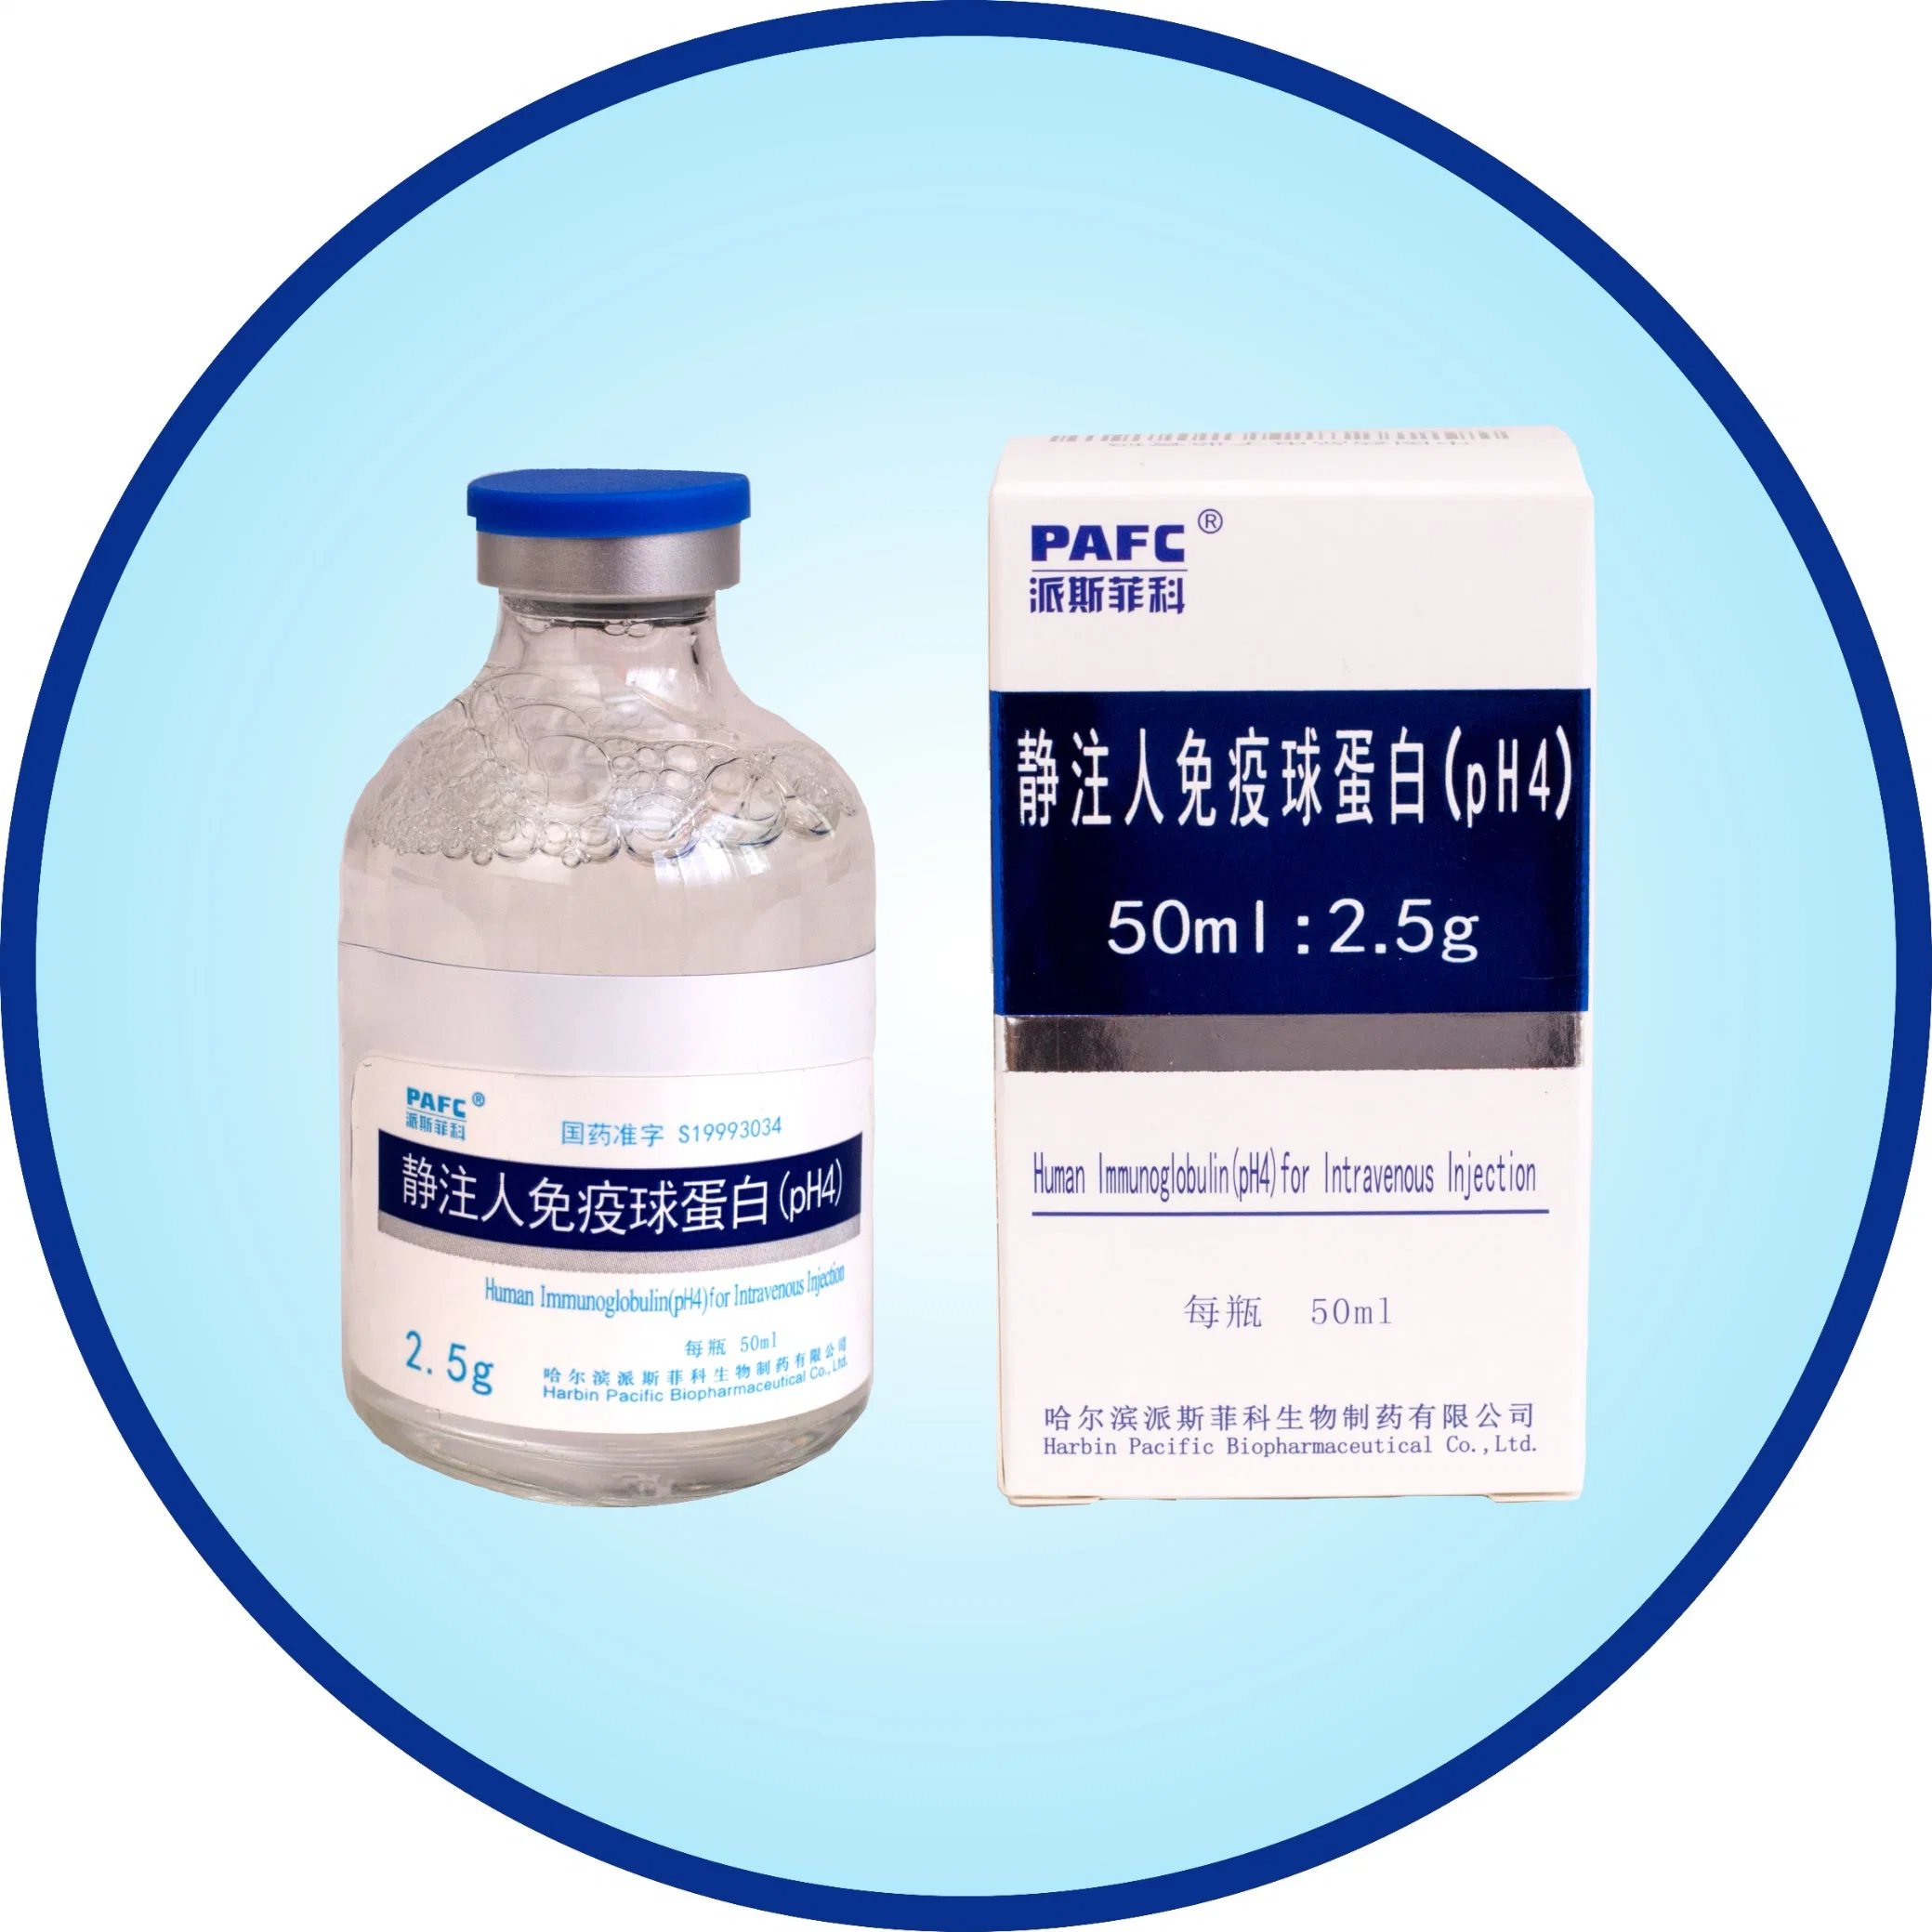 Biological Product to Improve Immunity-Human Immunoglobulin (pH4) for Intravenous Injection